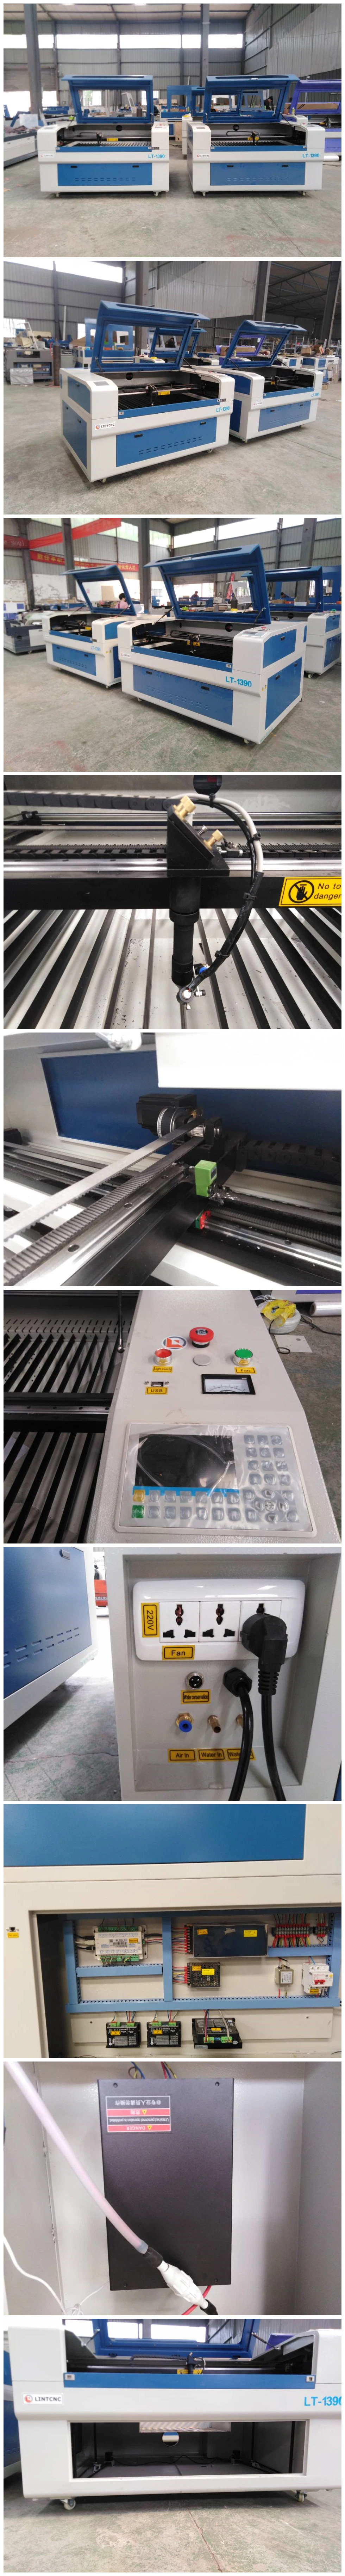 Top Laser Wood CNC CO2 Laser Cutting 1300*900mm 1390 Acrylic Sheet Laser Cutter and Engraver Machine 1610 CO2 Laser Engraver